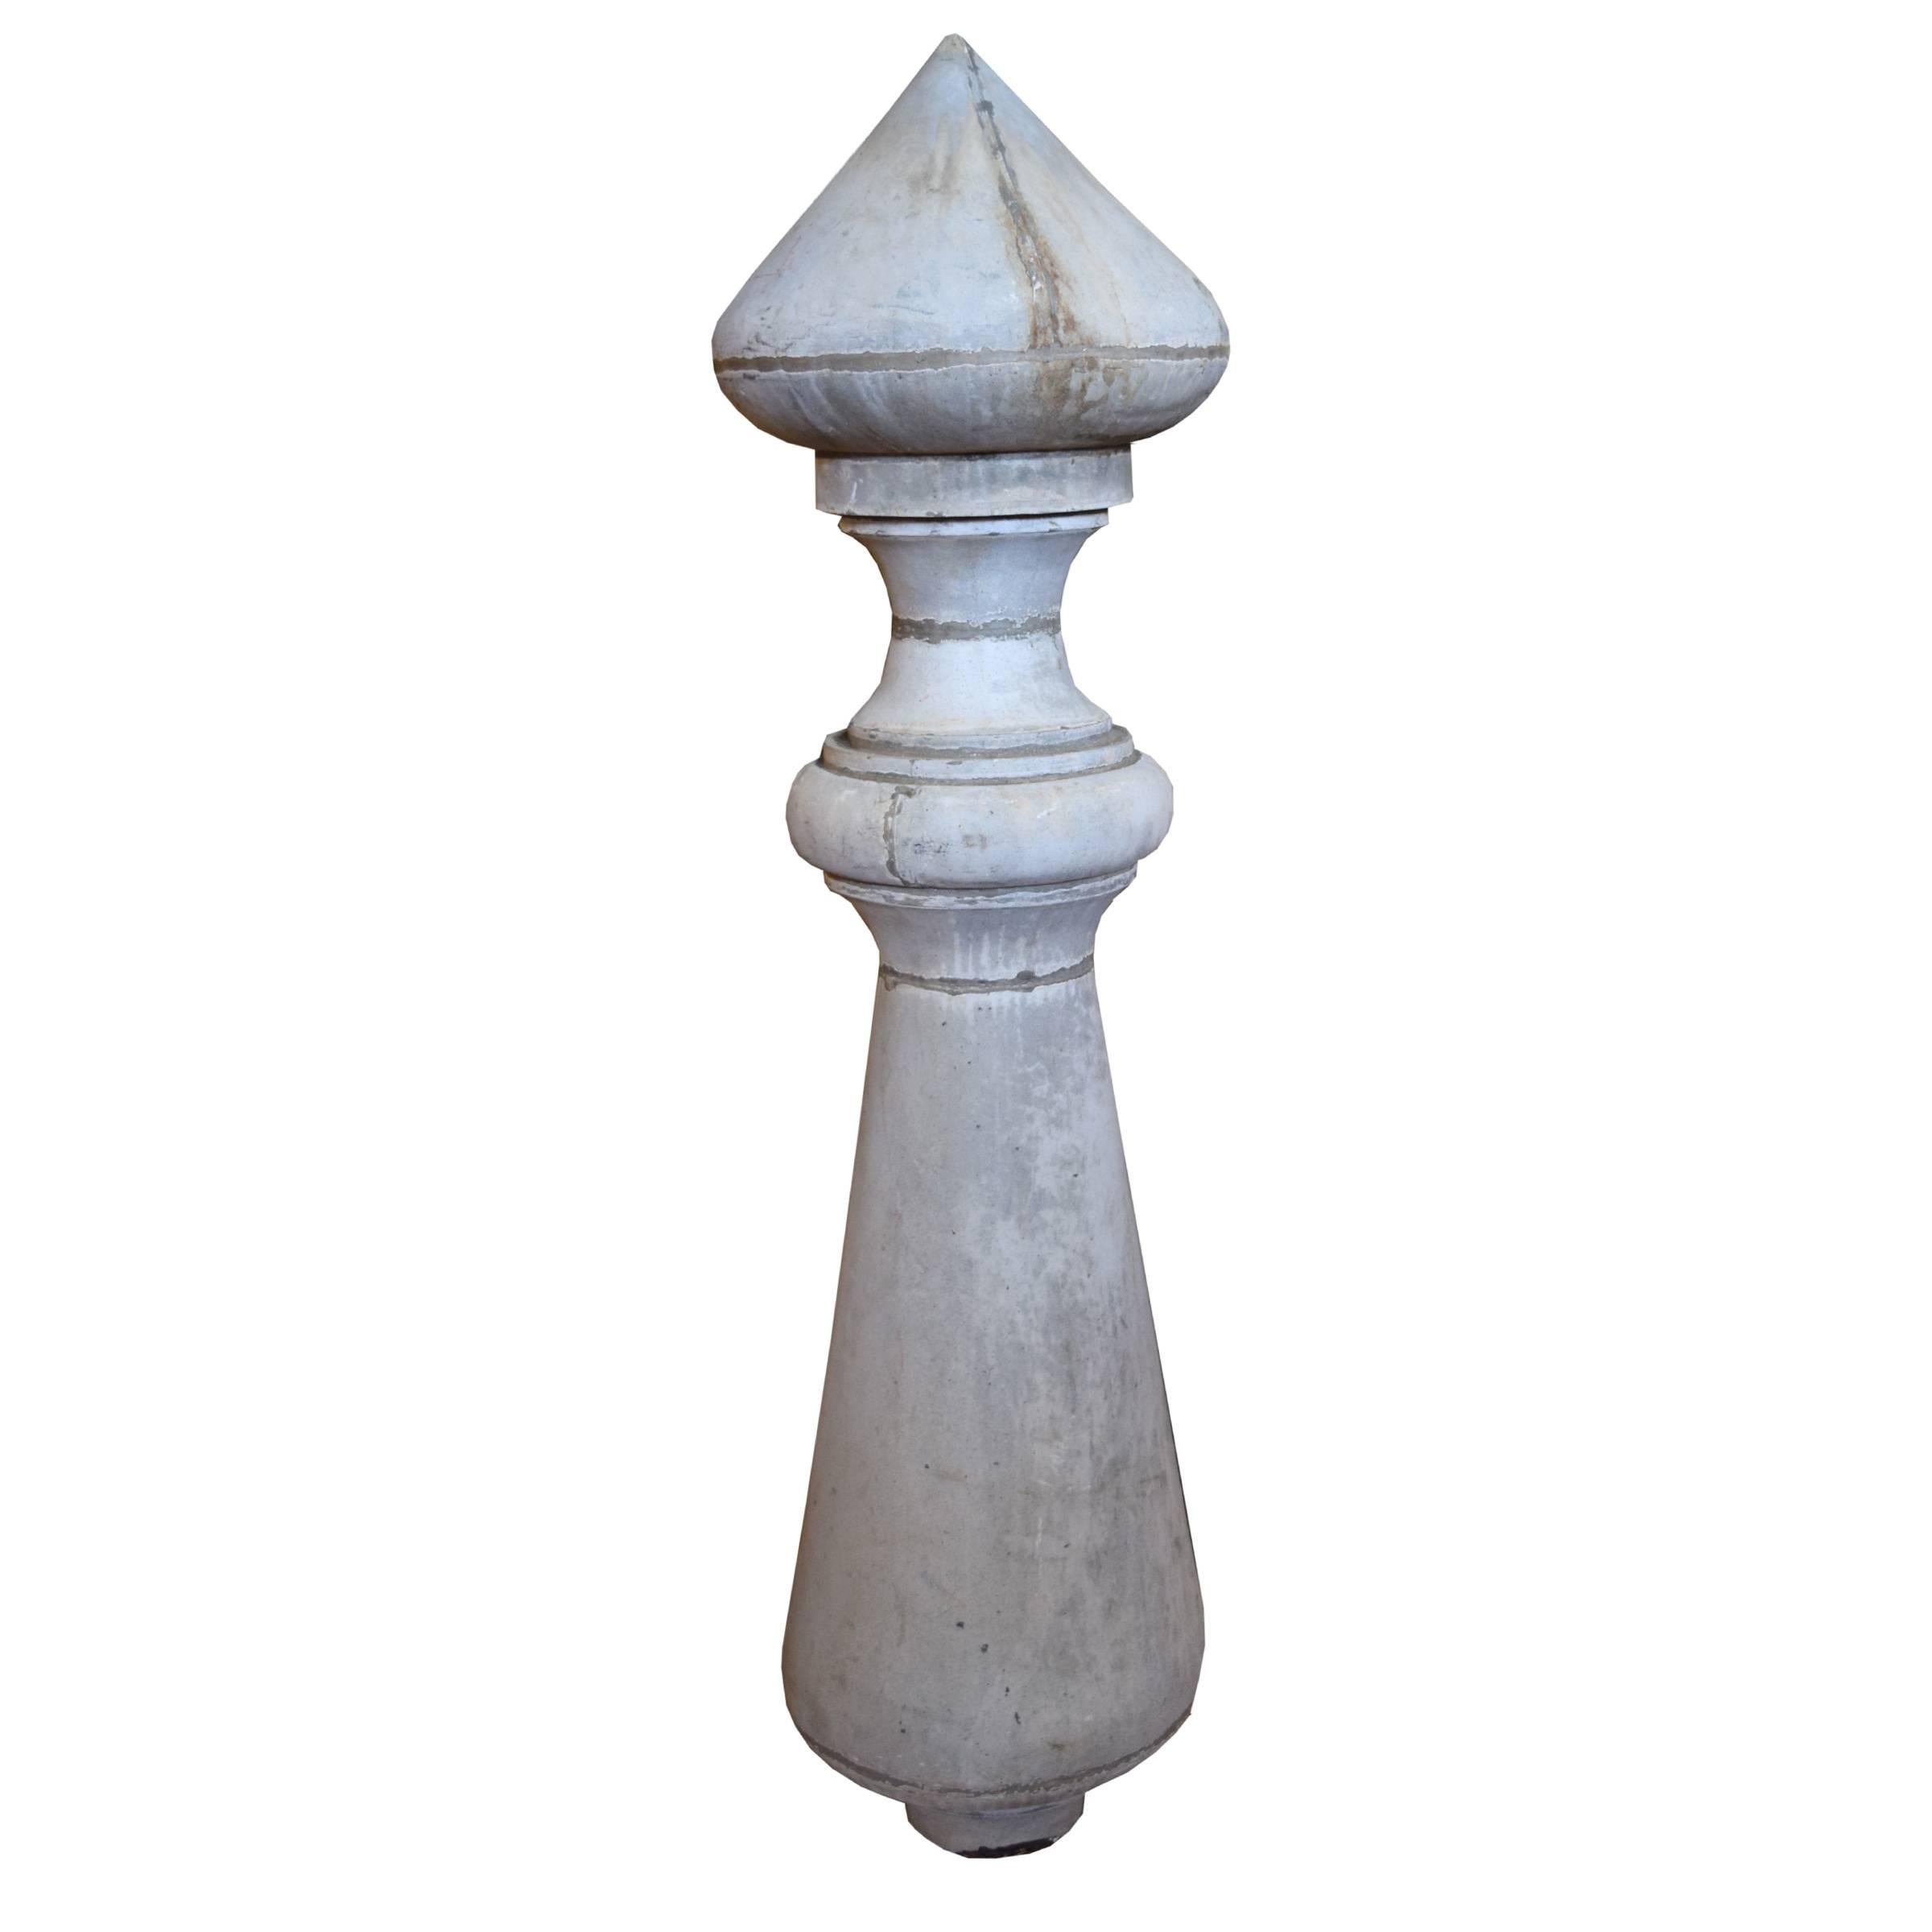 A French zinc finial having a pointed conical top and turned body with great patina throughout, circa 1910.
 